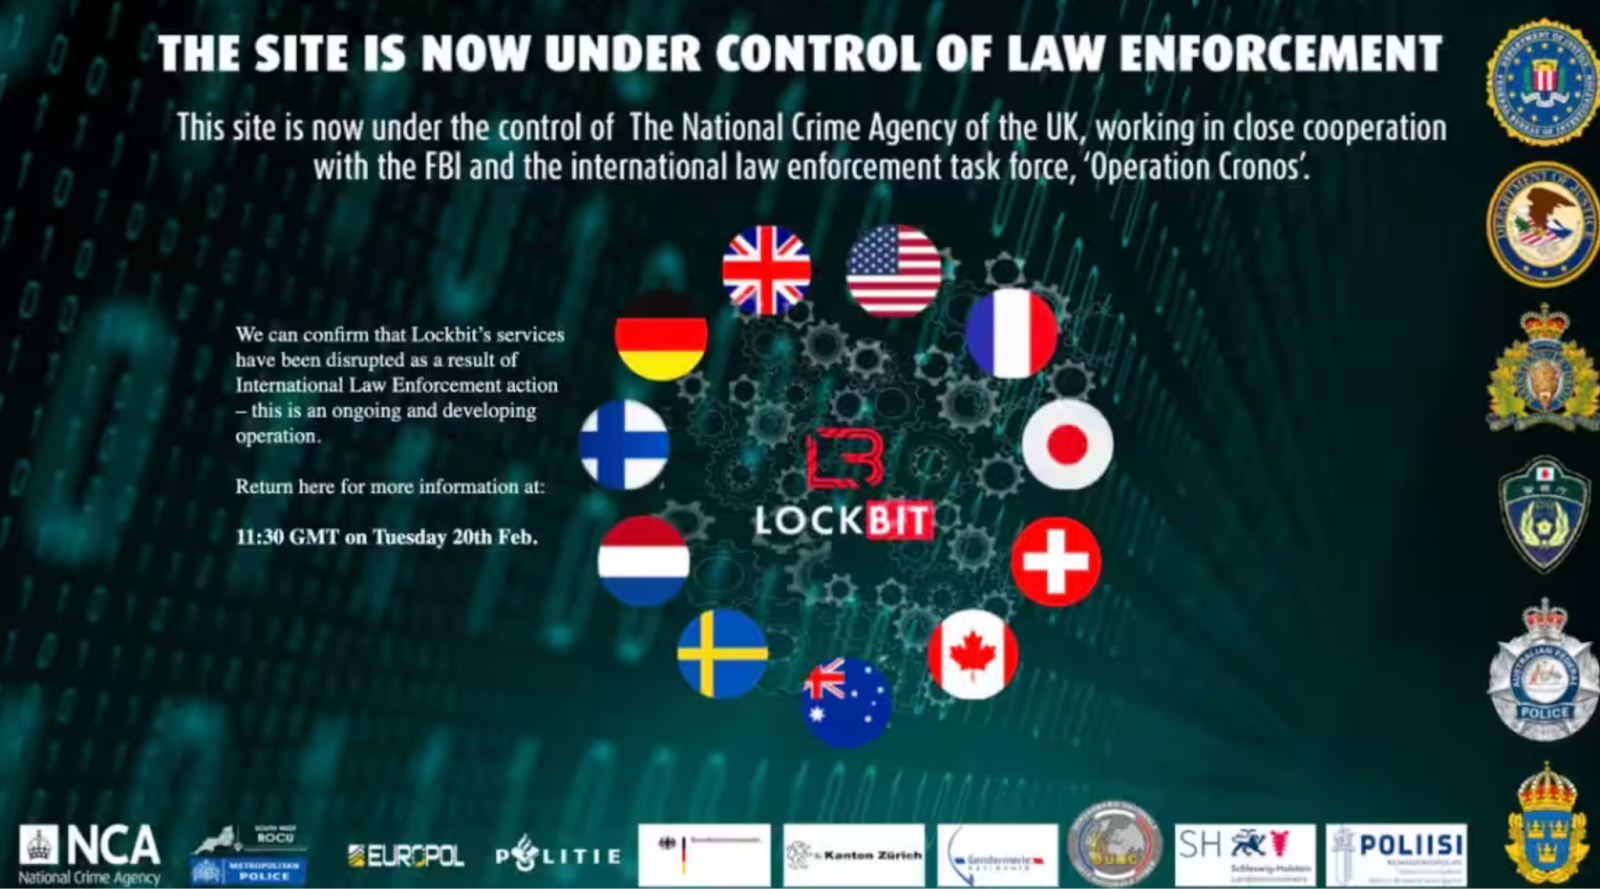 The LockBit front page after the takedown shows a message from law enforcement agencies with the logos of their organizations and the flags of the involved organizations around the LockBit logo